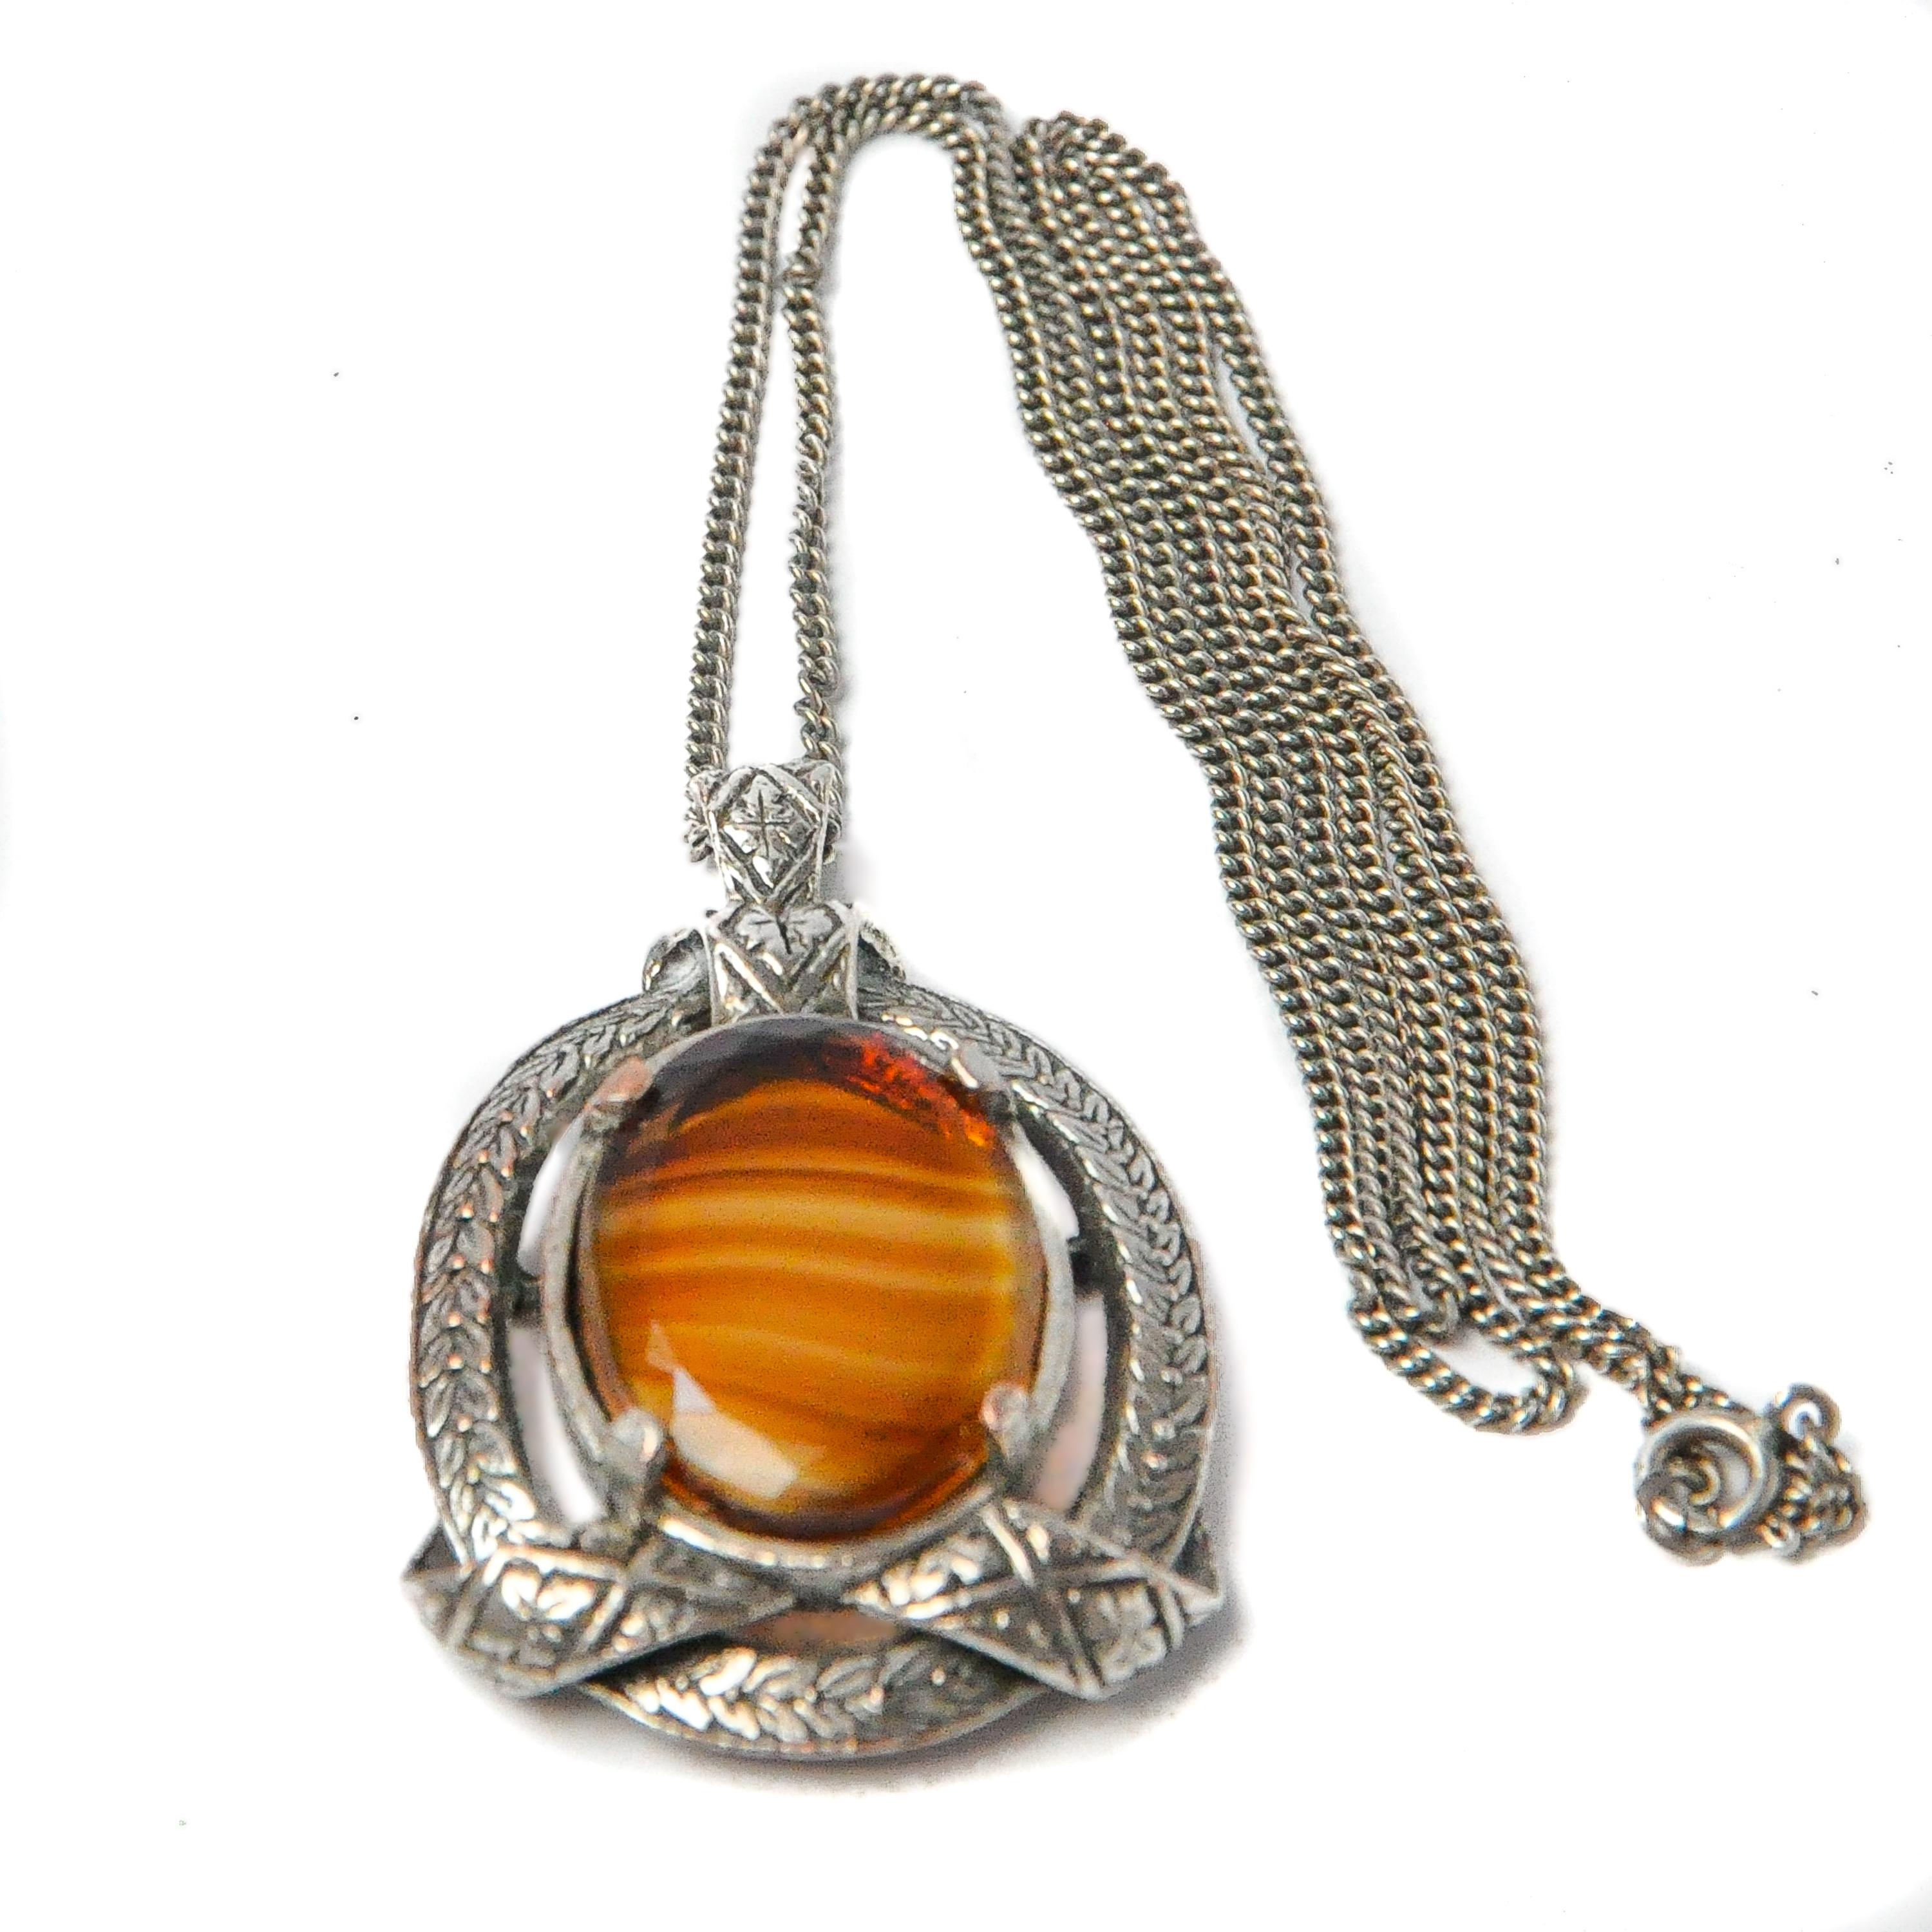 This beautiful vintage pendant necklace is set with a large tiger's eye quartz stone. The silver frame has nice engraved details with a floral decor. The border of the silver frame has a wreath-like design. The tiger's eye is oval-shaped and has a